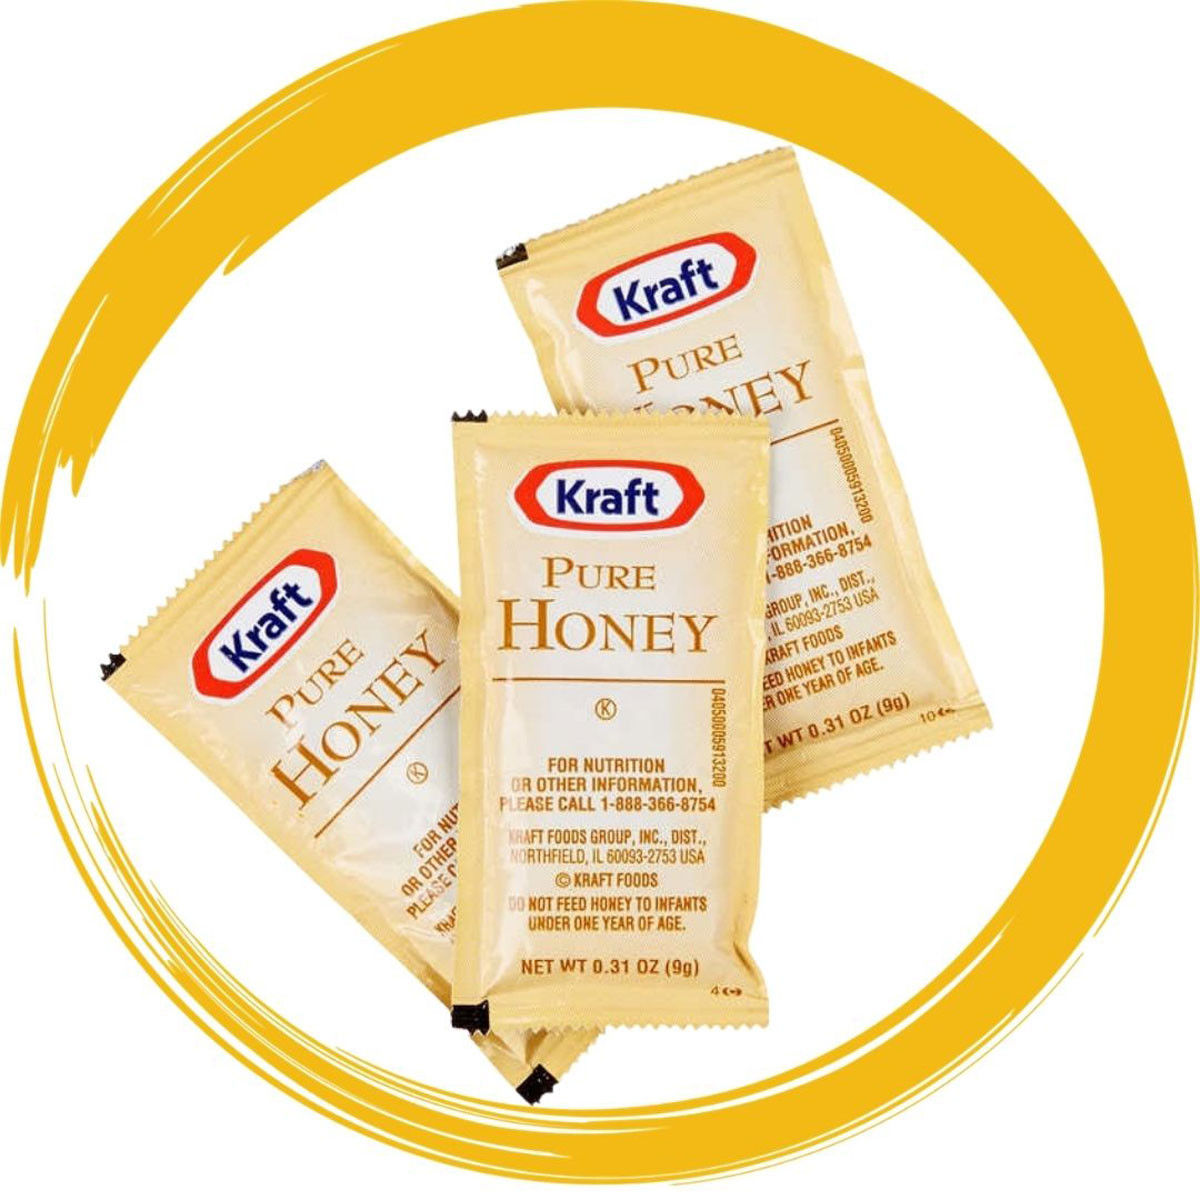 What is the case quantity for Kraft Pure Honey Packets (100 count)?